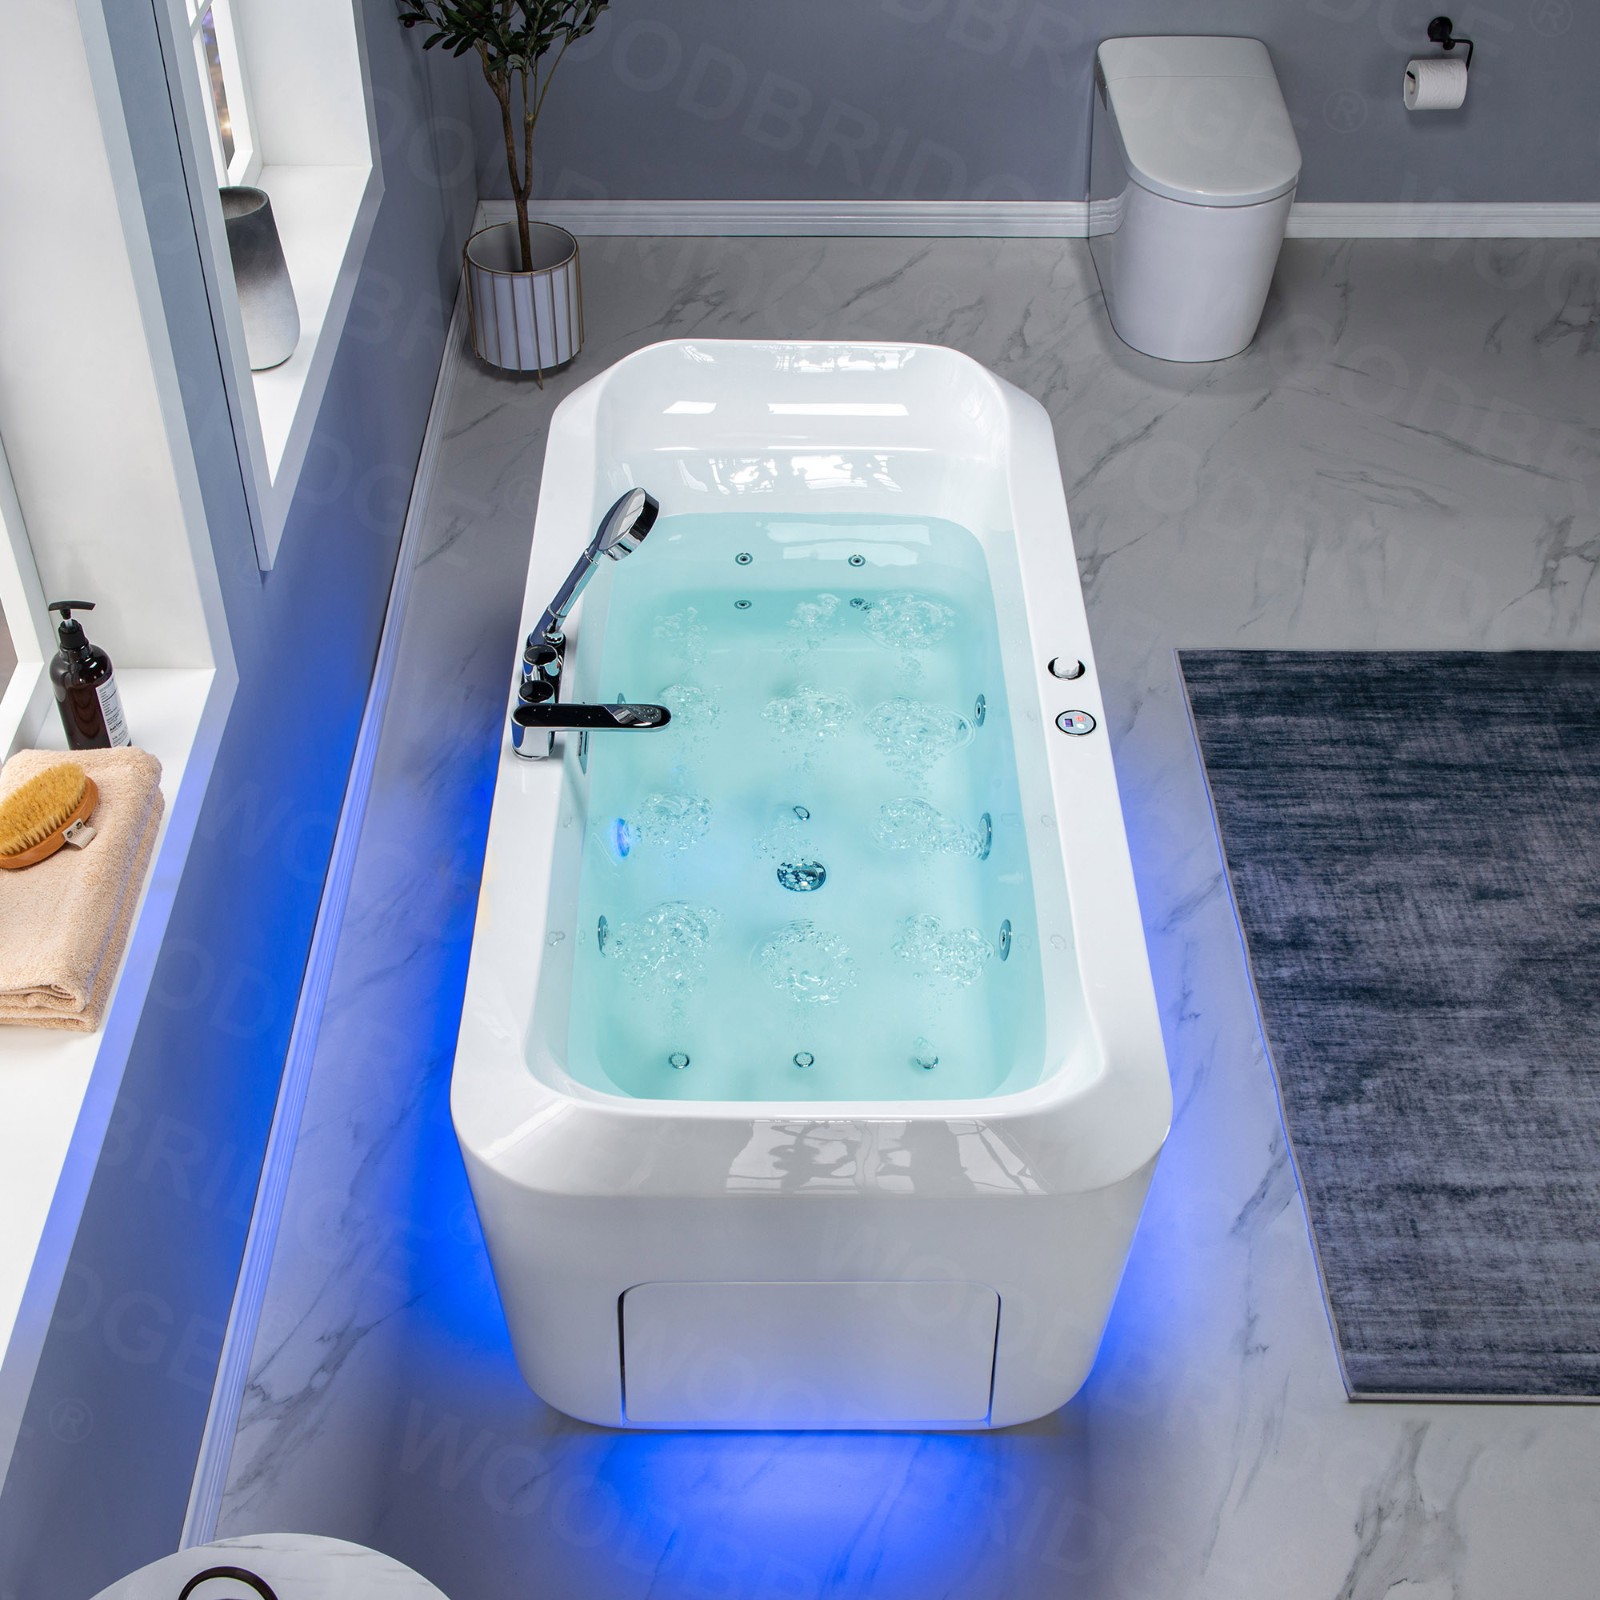  1 Person Freestanding Massage Hydrotherapy Bathtub Tub Hot Tub Spa, with Inline Heater. BTS-0092_9087